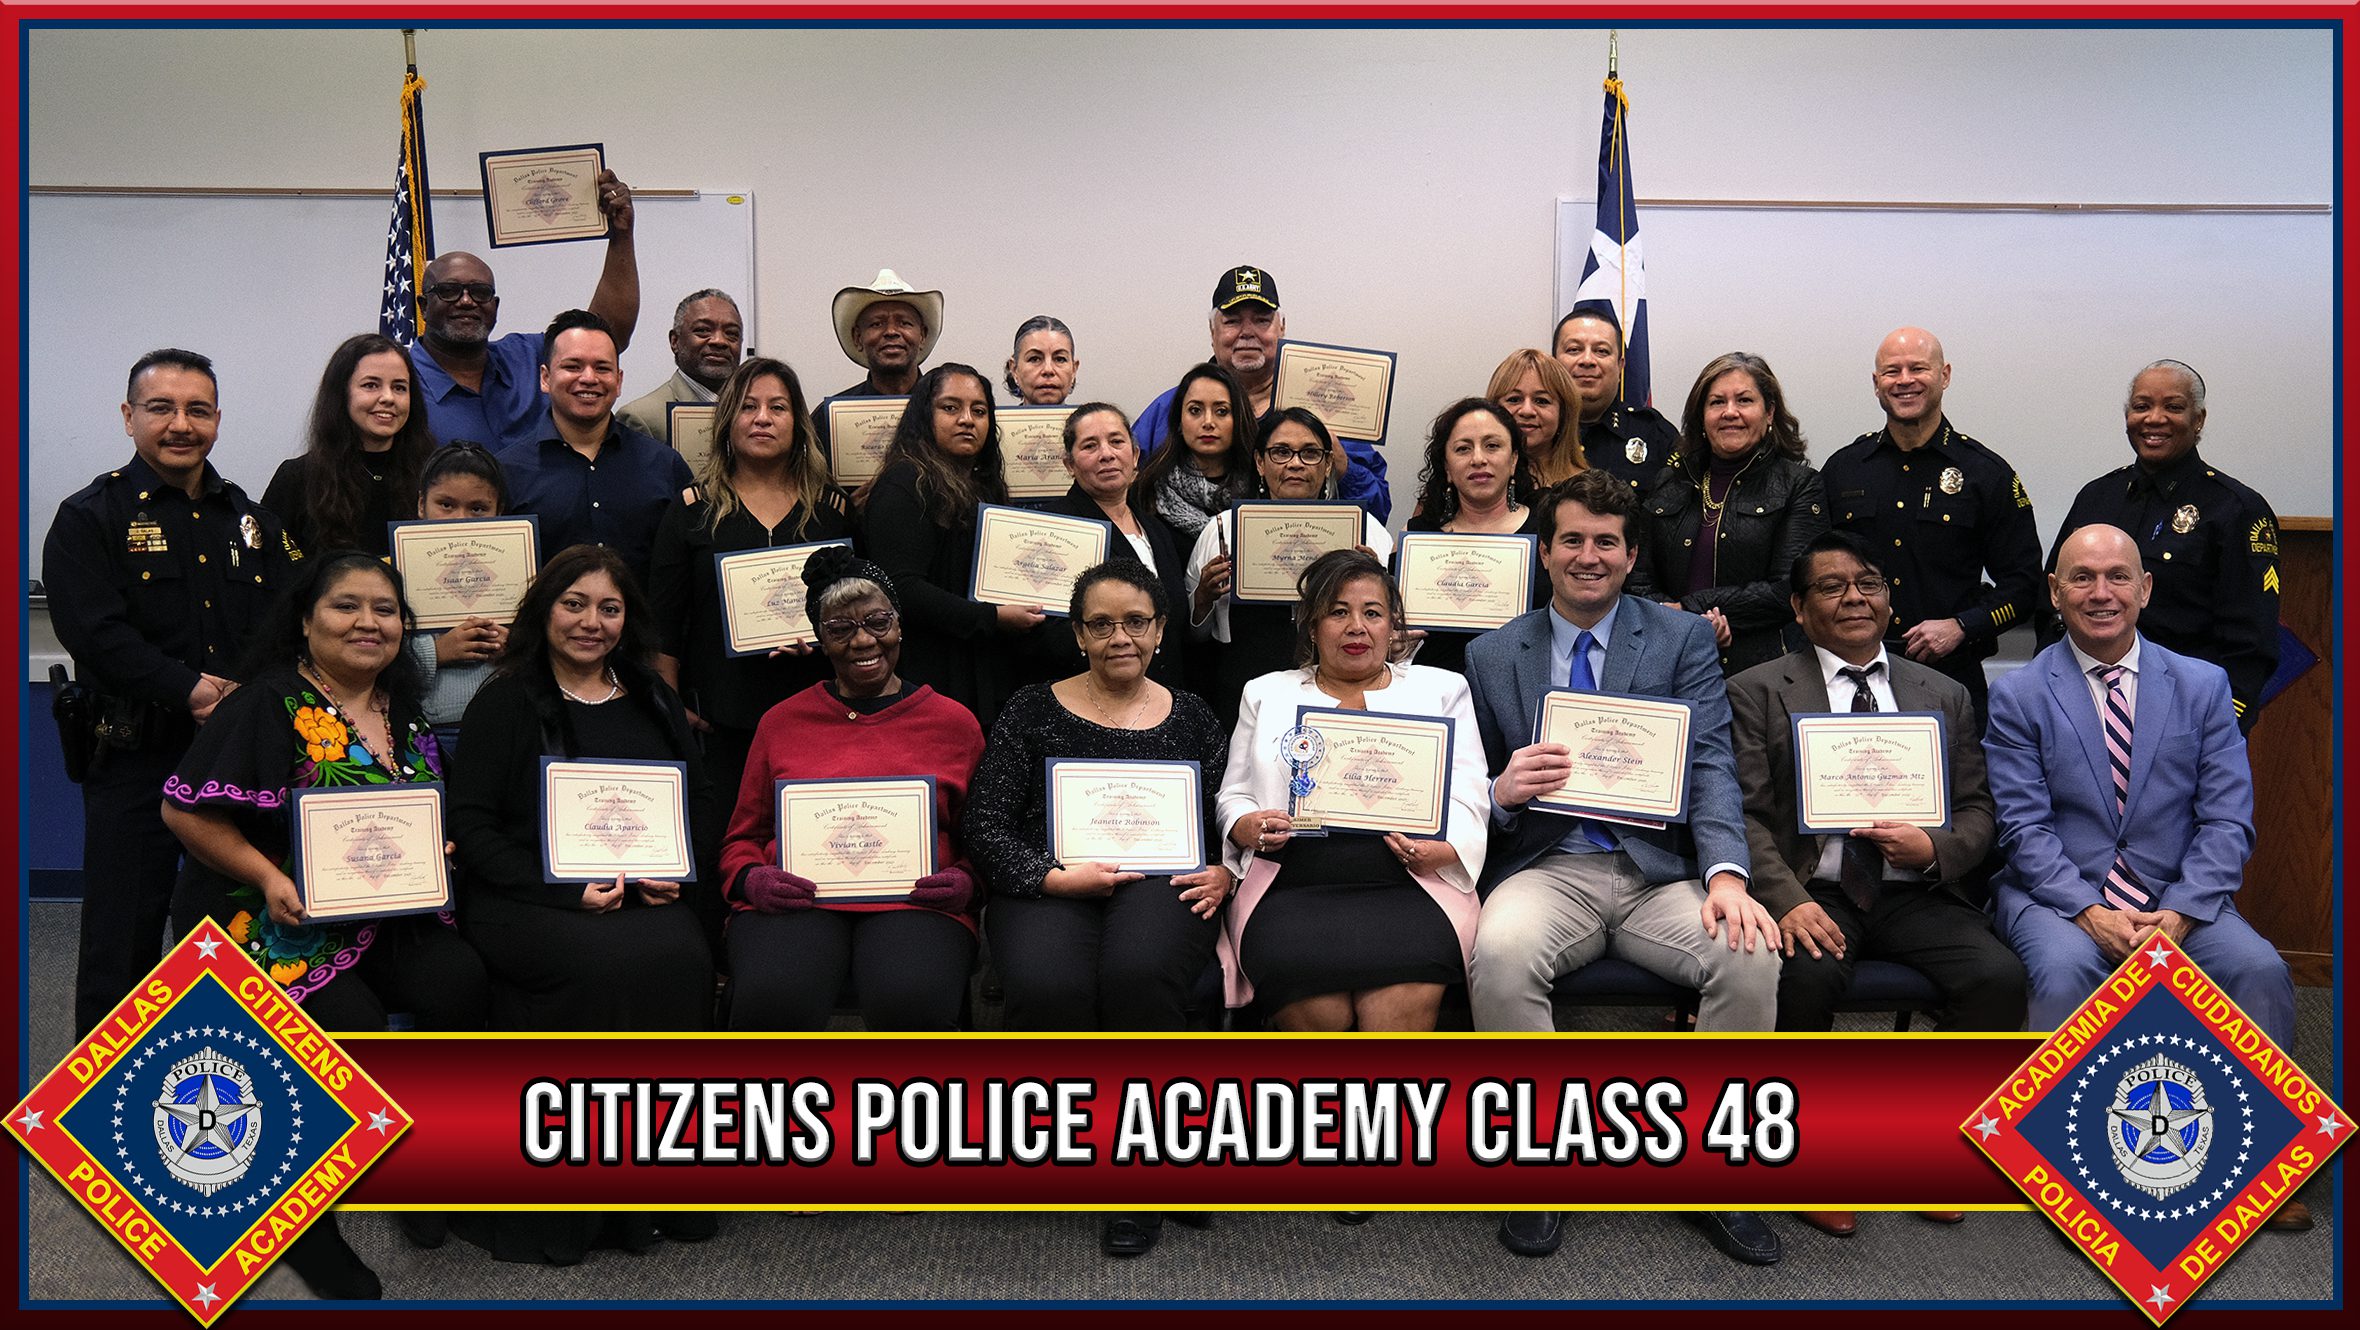 The Police Citizen's Academy Class which graduated in December 2021.